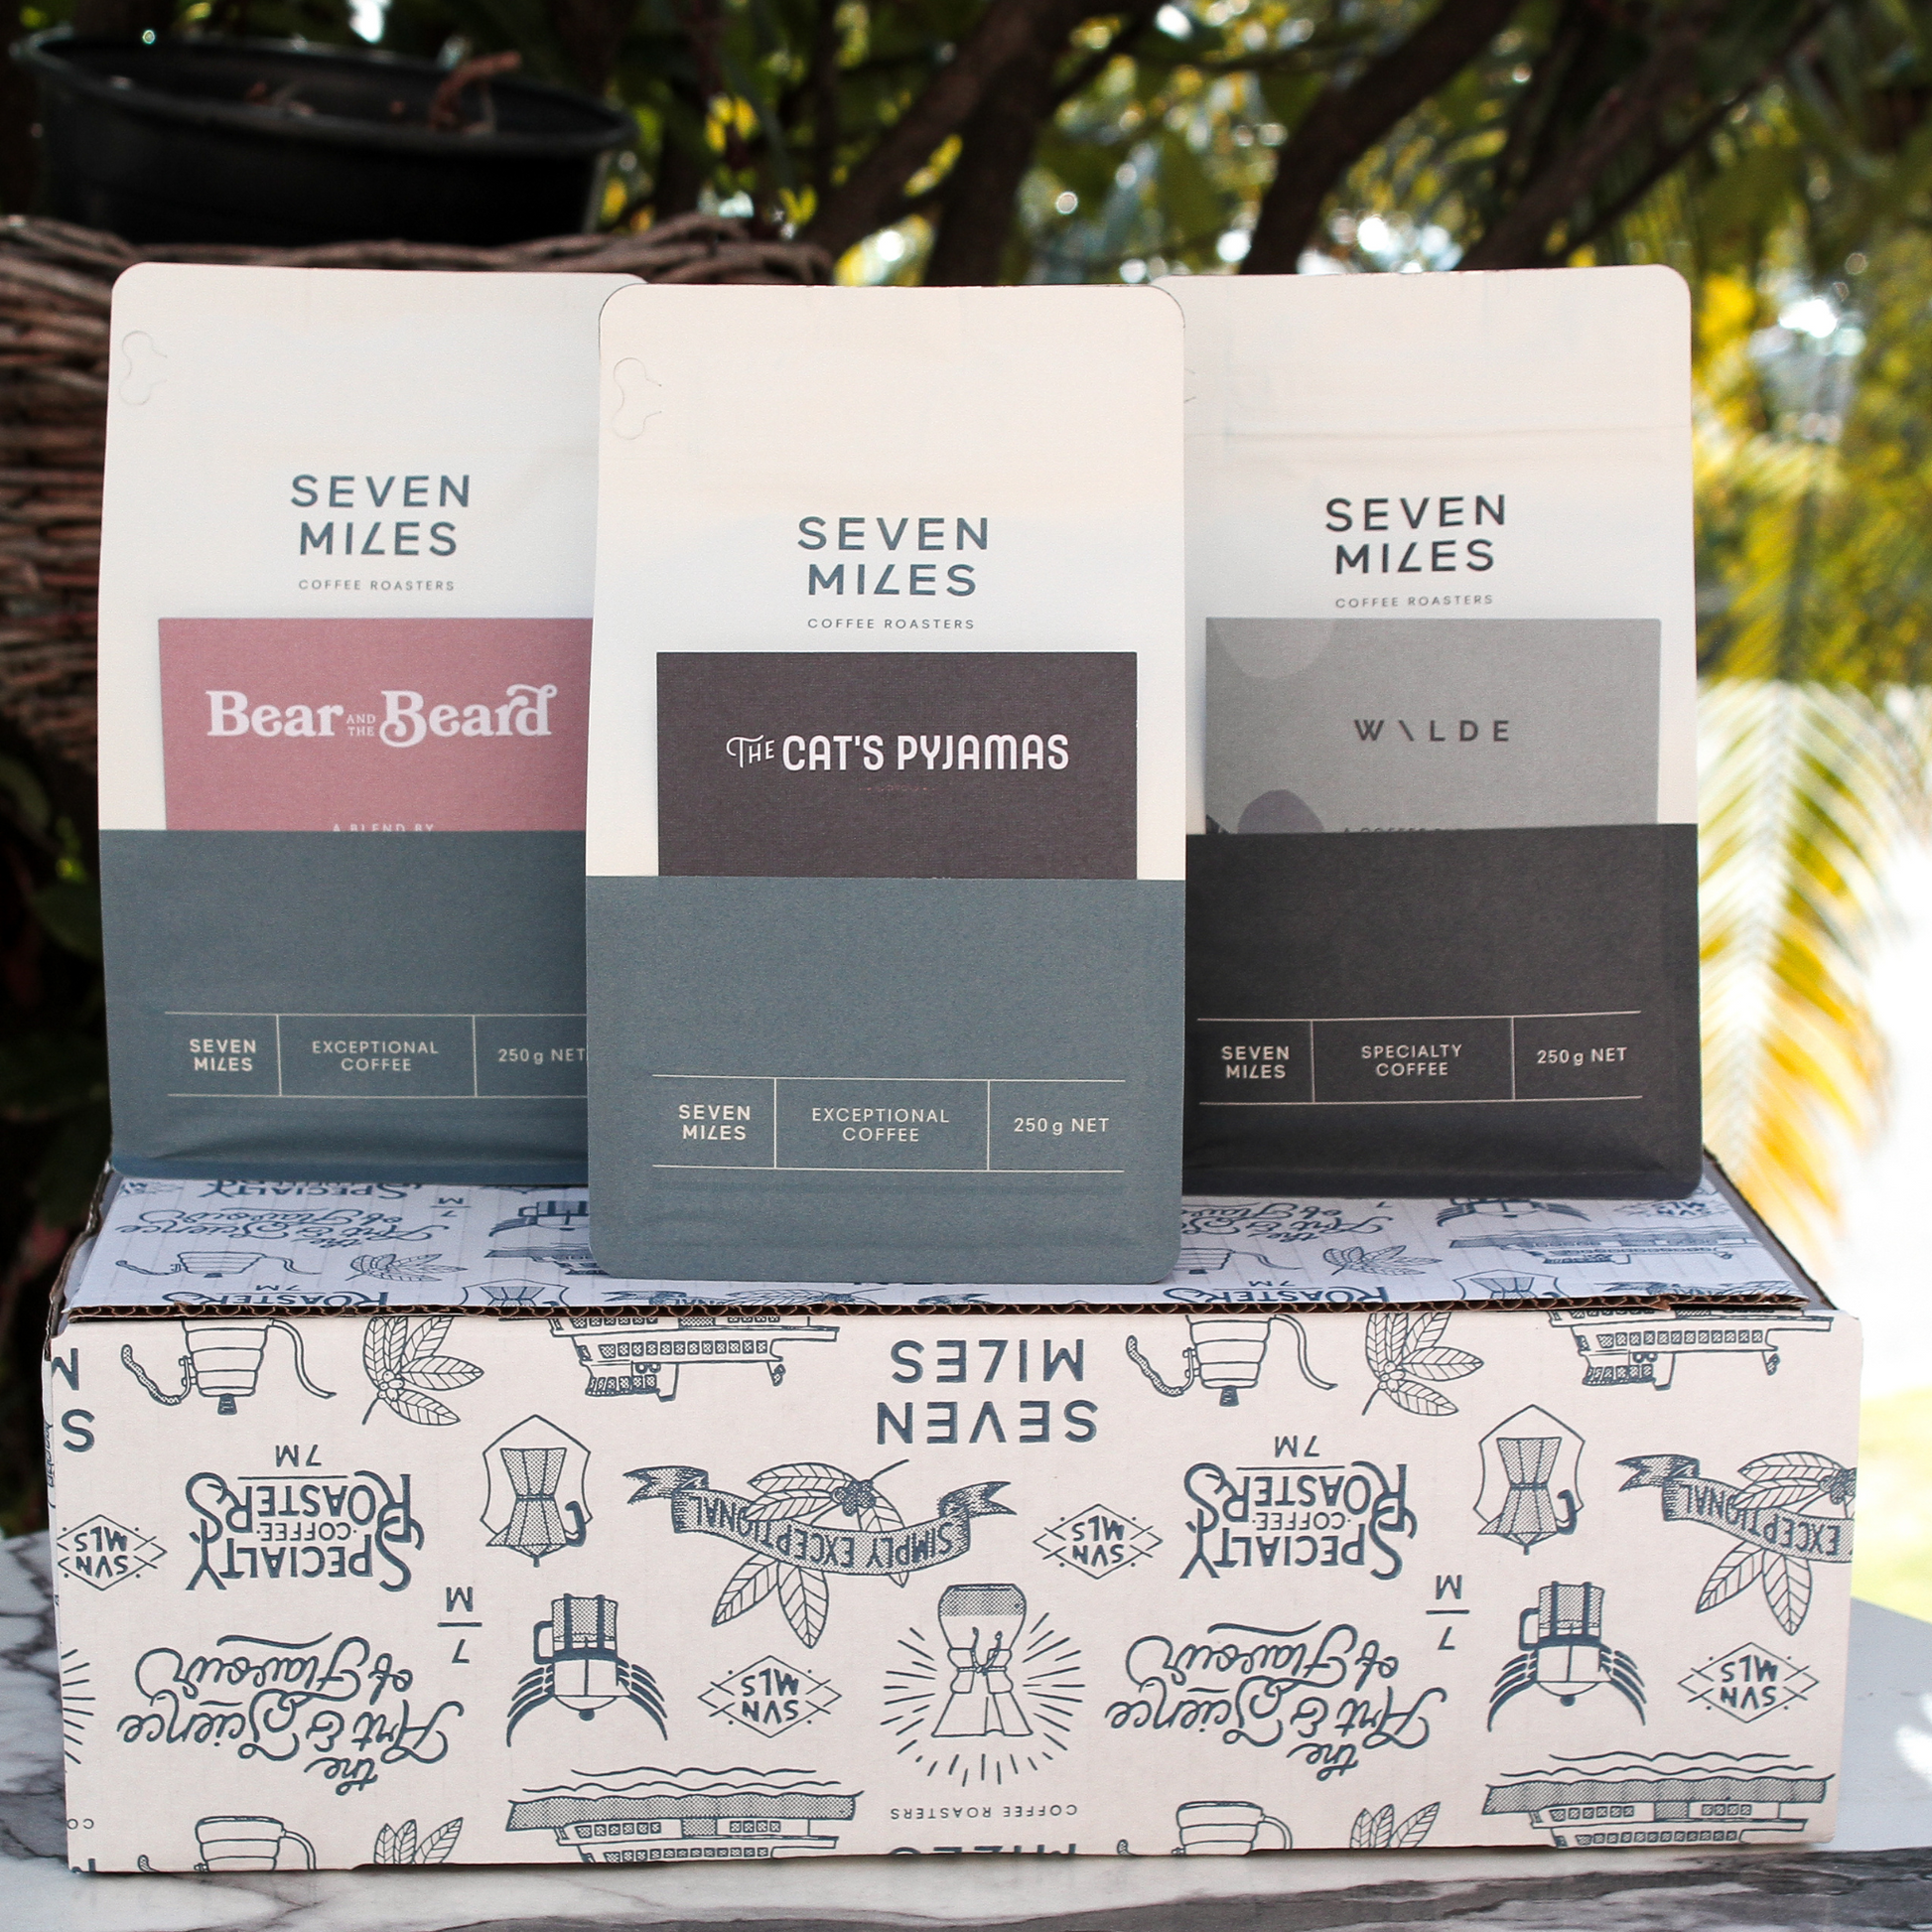 Three of Seven Miles' bestselling coffee blends in our new coffee blend sampler pack including Cat's Pyjamas, Bear and the Beard and Wilde 250g Coffee bags shipped on a beautiful box.